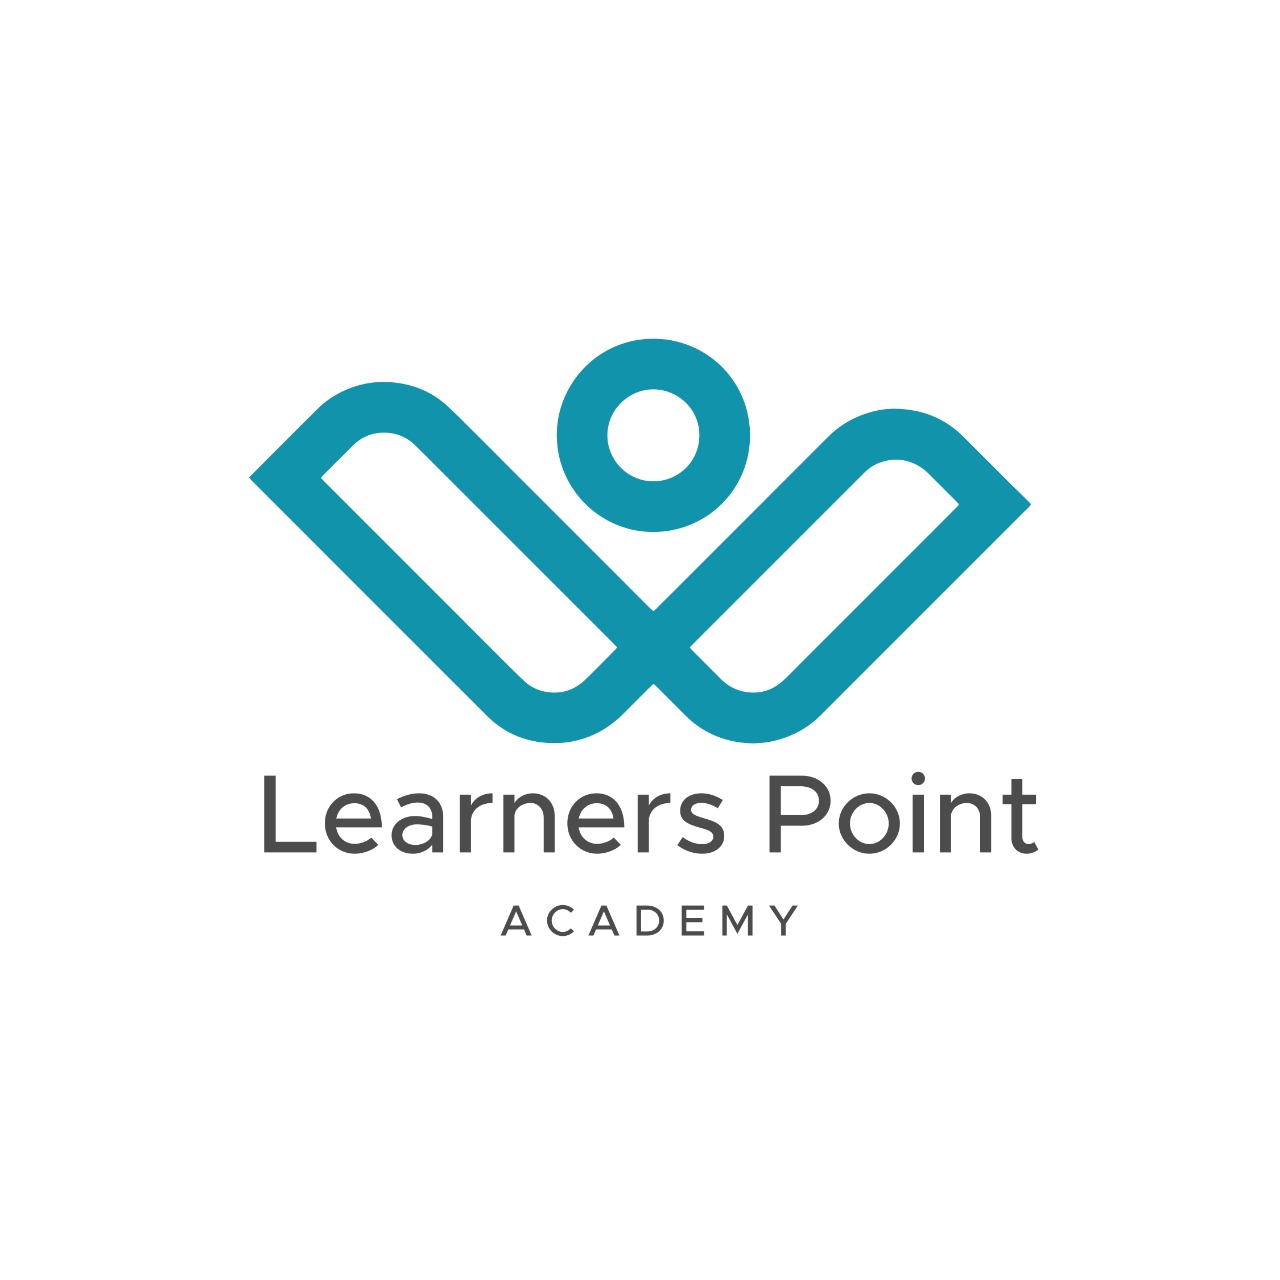 More about Learners Point Training Institute